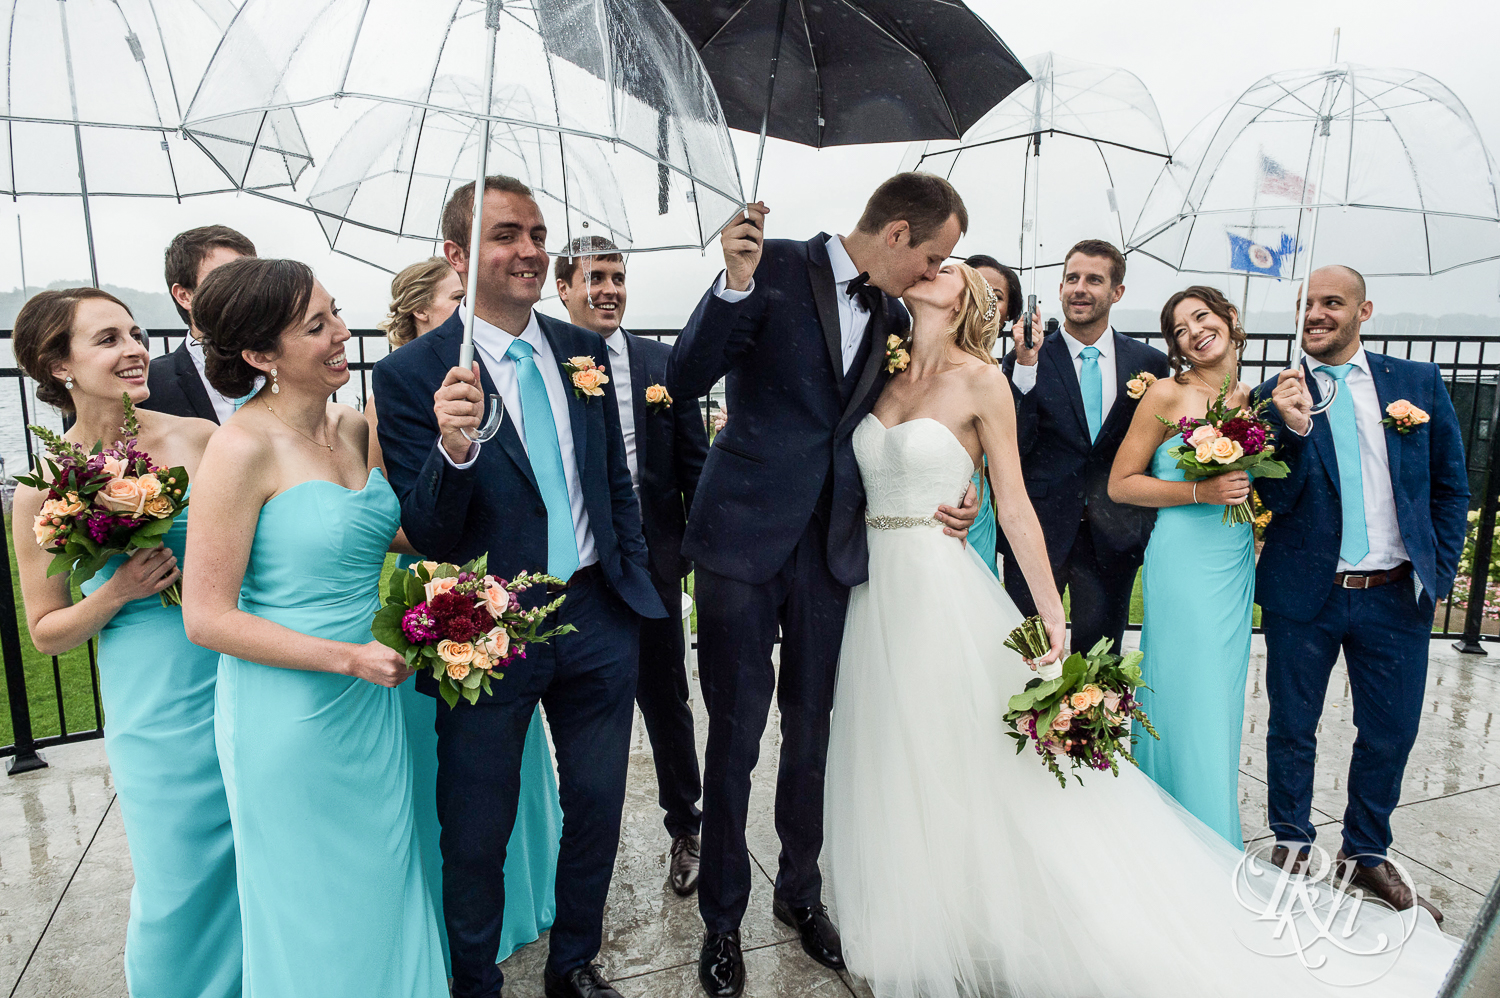 Bride and groom kiss with umbrella on rainy wedding day at White Bear Yacht Club in Dellwood, Minnesota.